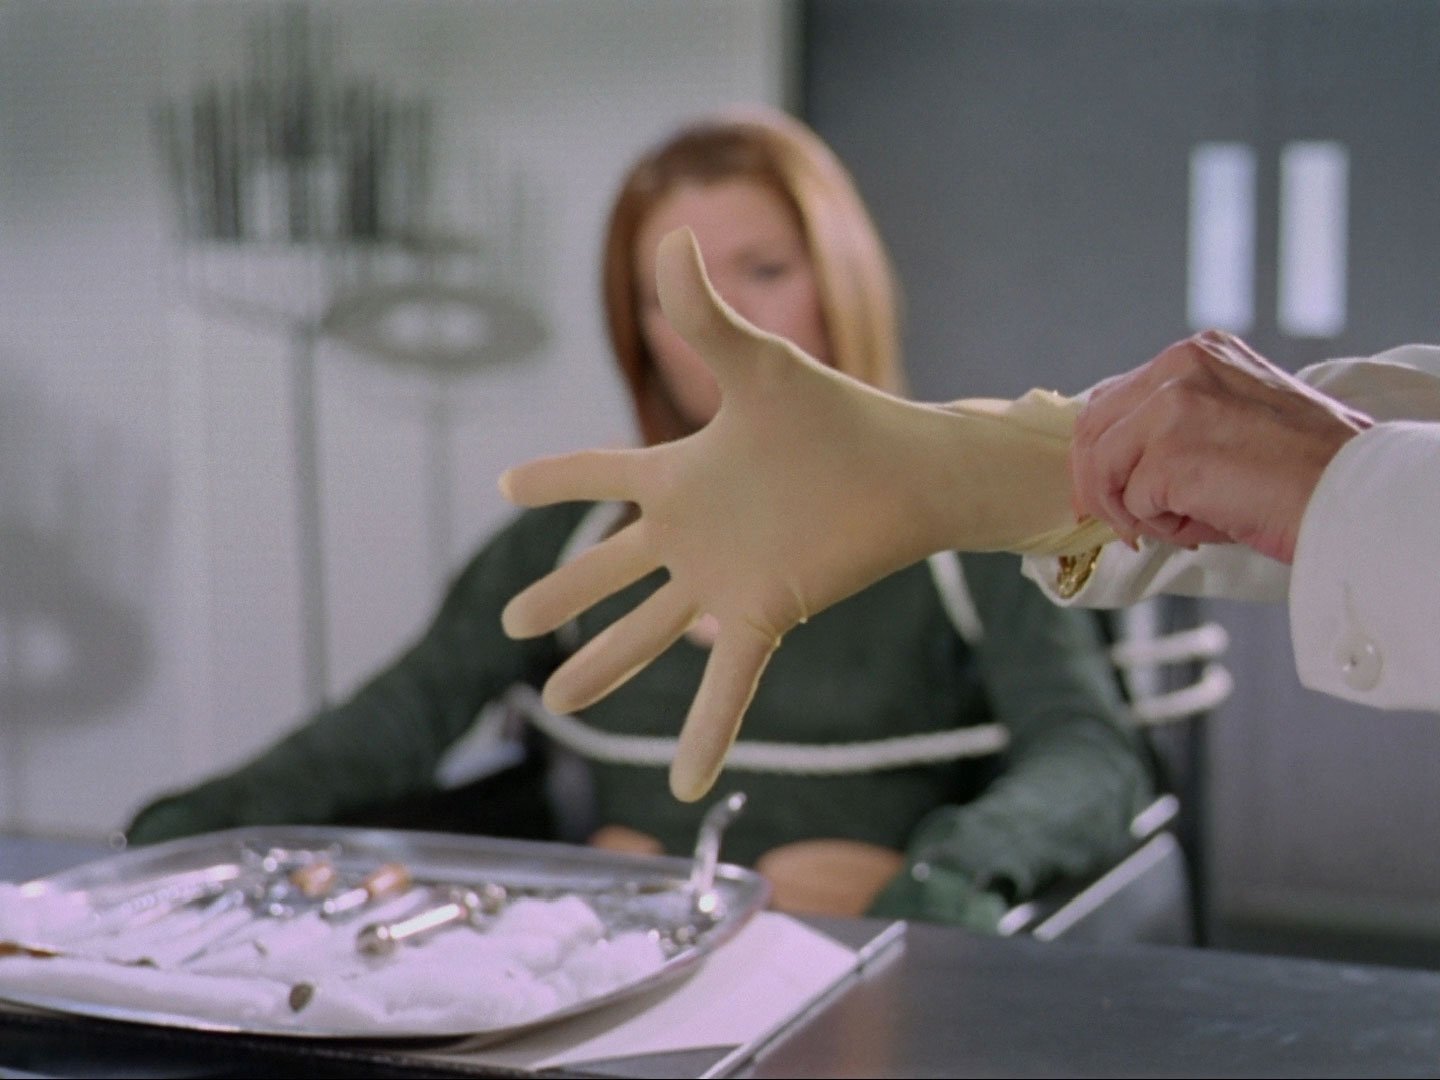 A latex-gloved hand near some surgical instruments